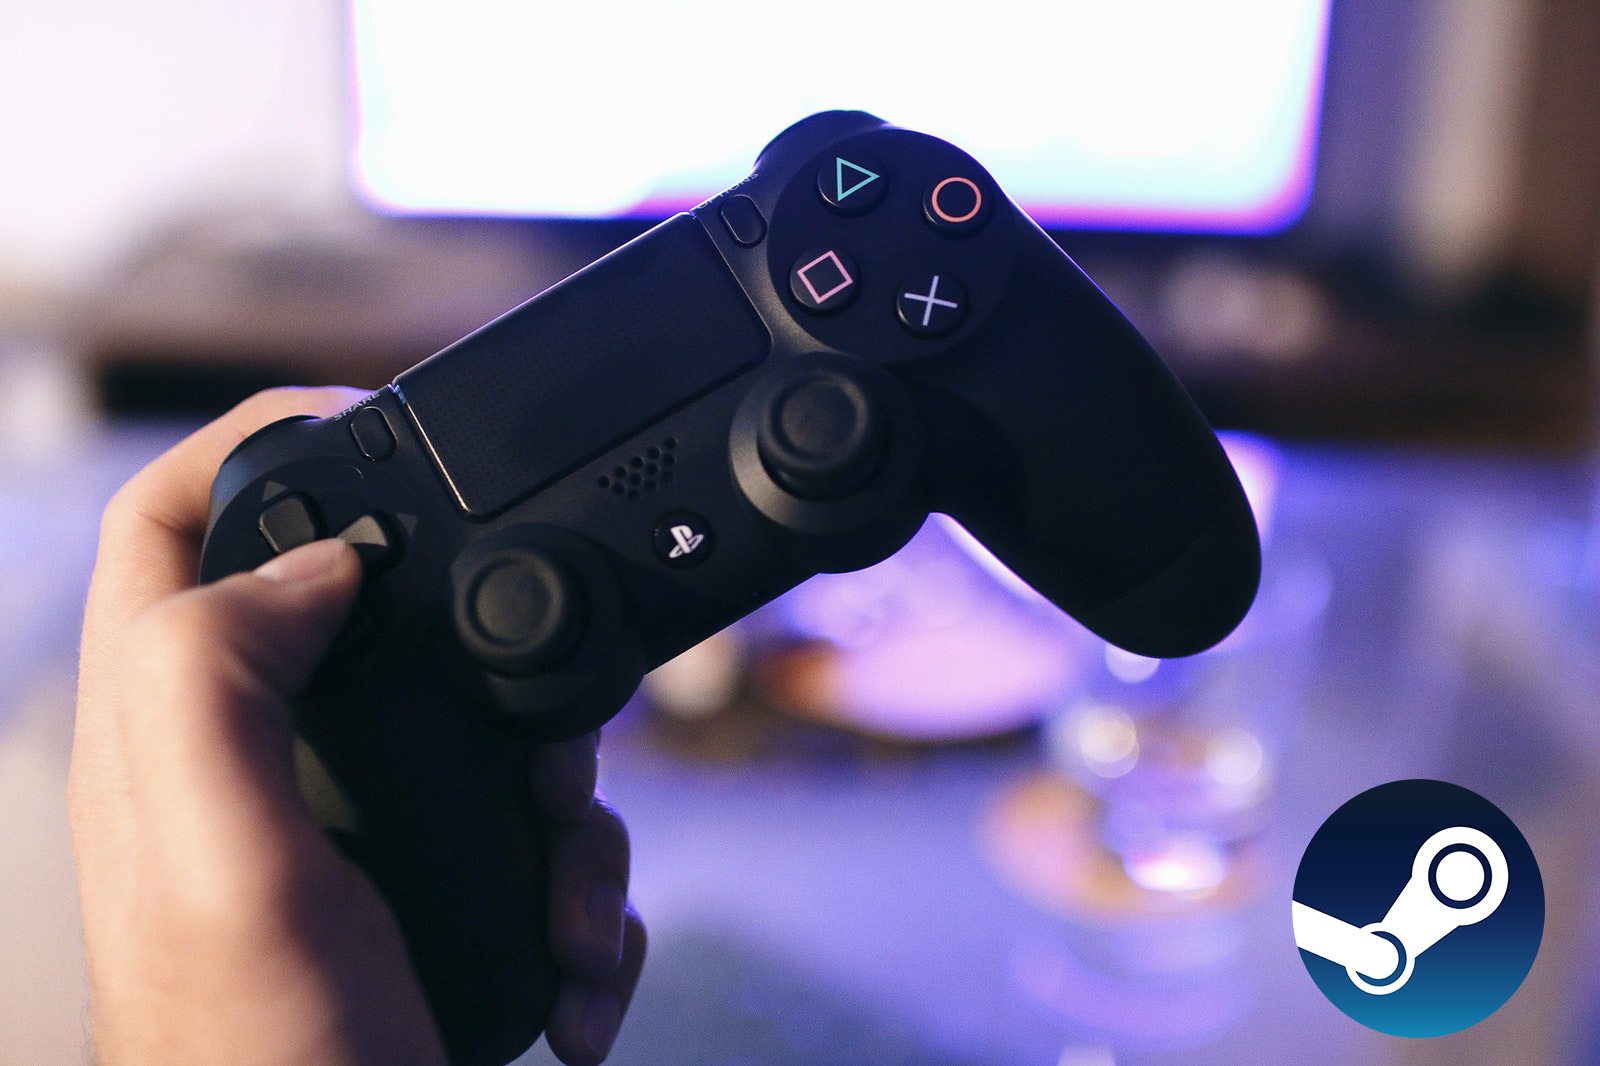 How To Use a PS4 Controller on Your PC